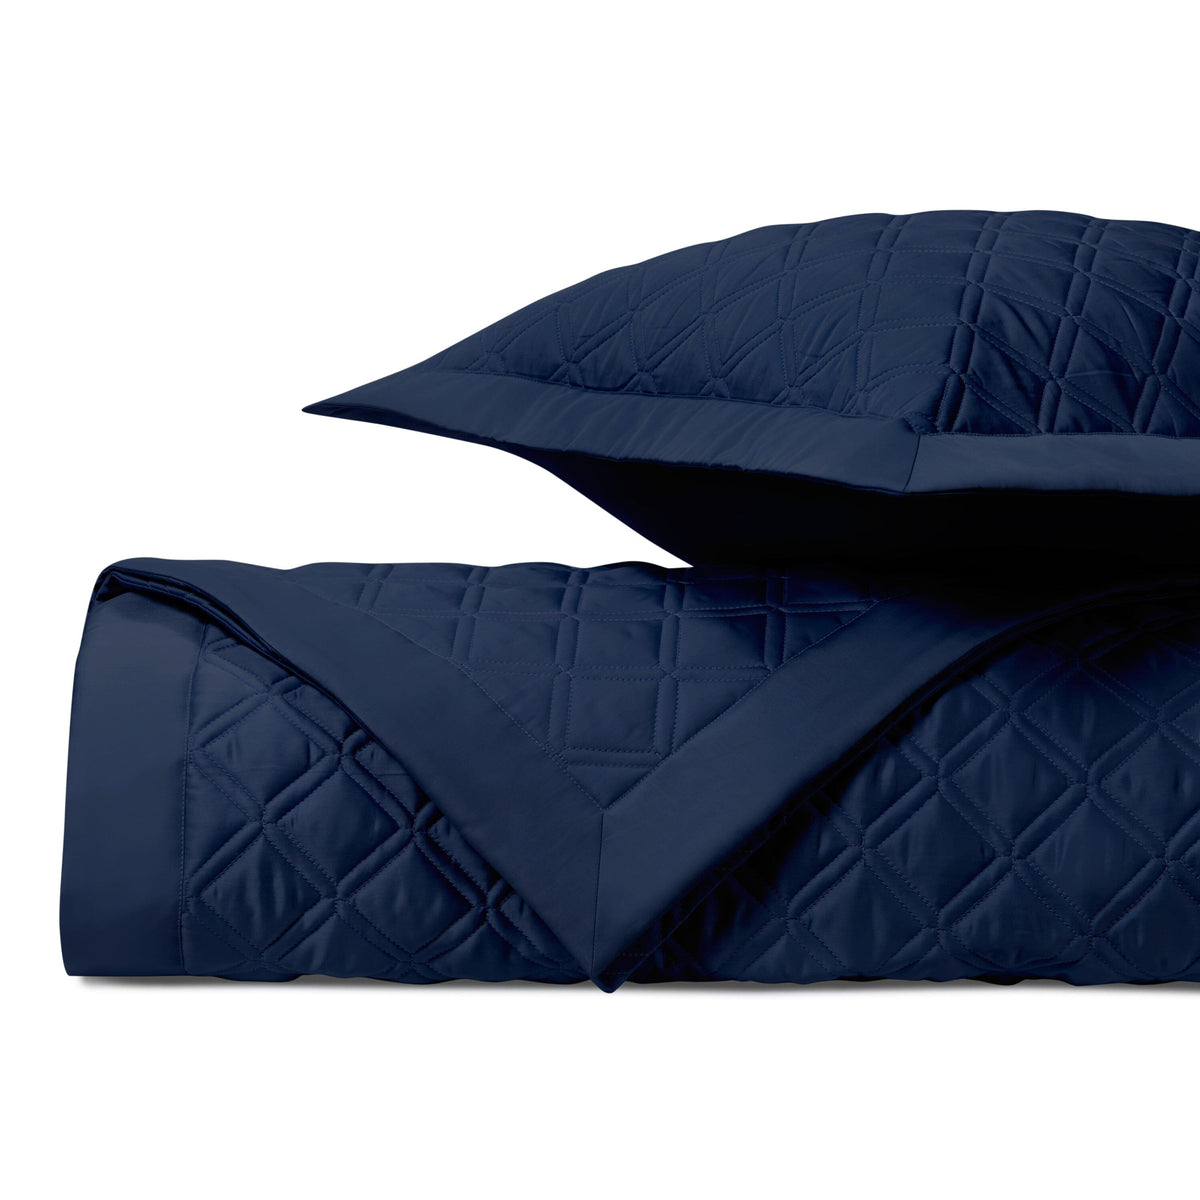 RENAISSANCE Quilted Coverlet in Navy Blue by Home Treasures at Fig Linens and Home